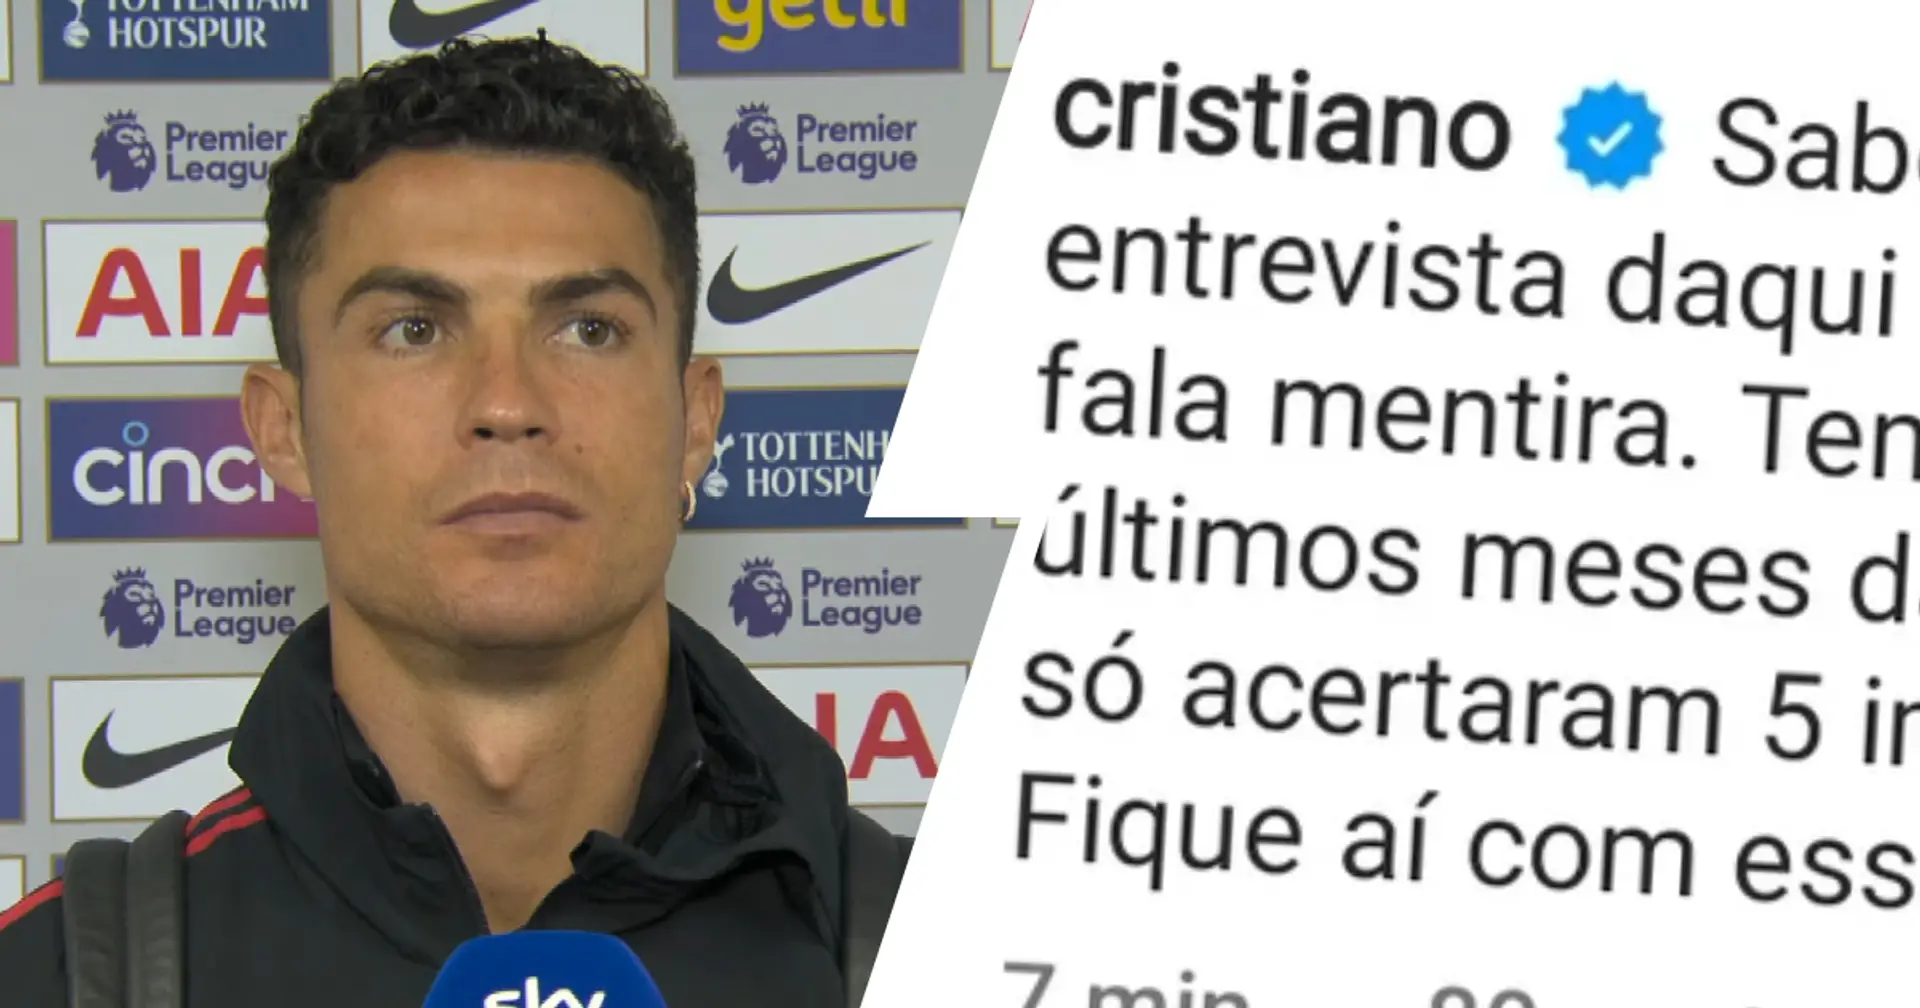 'Out of 100 stories, they only got 5 right. They'll know the truth': Ronaldo slams media on Instagram amid exit claims